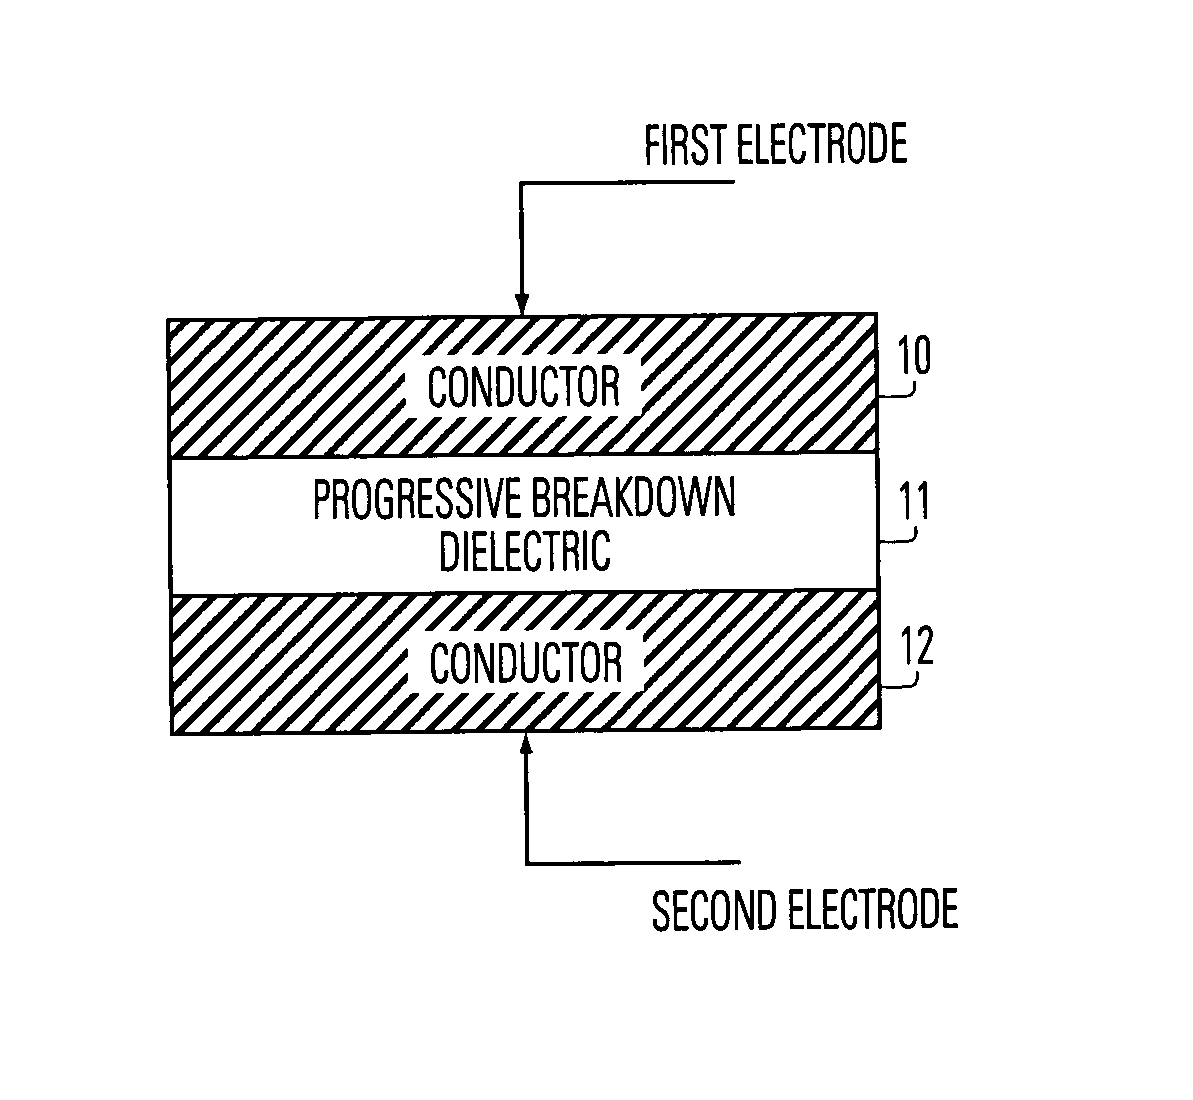 Method for manufacturing a programmable eraseless memory